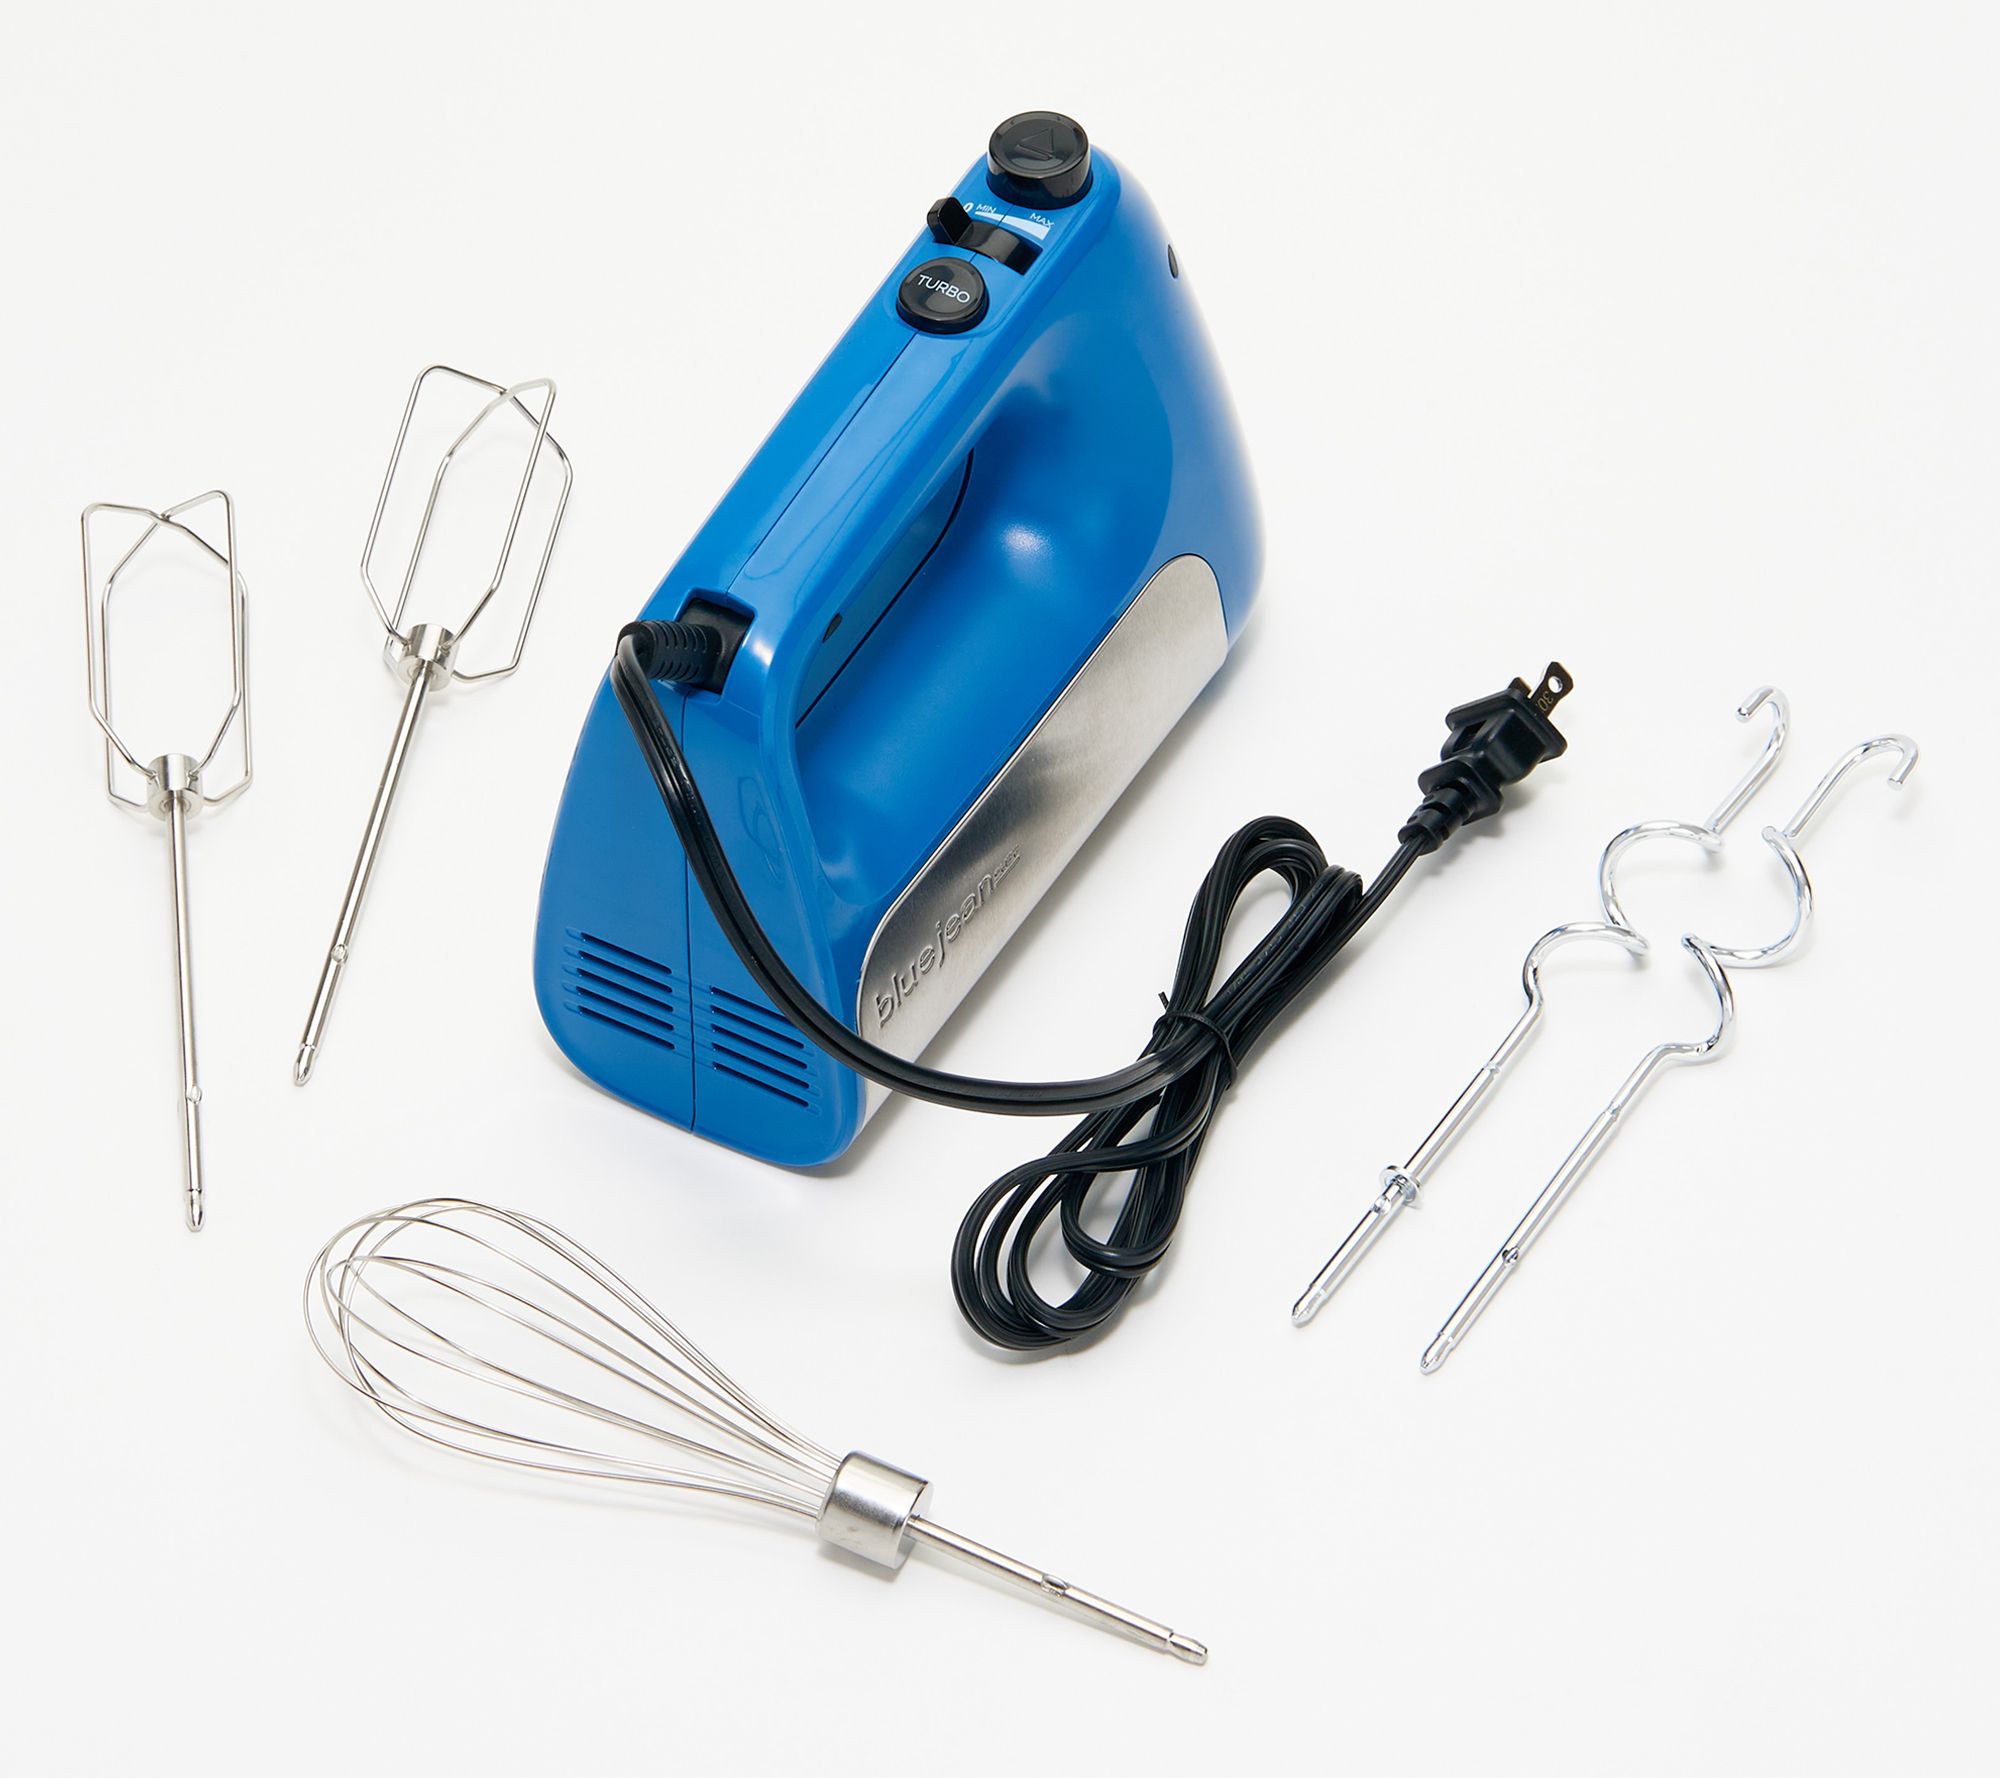 Blue Jean Chef Variable Speed Hand Mixer with Dough Hooks and Whisk 